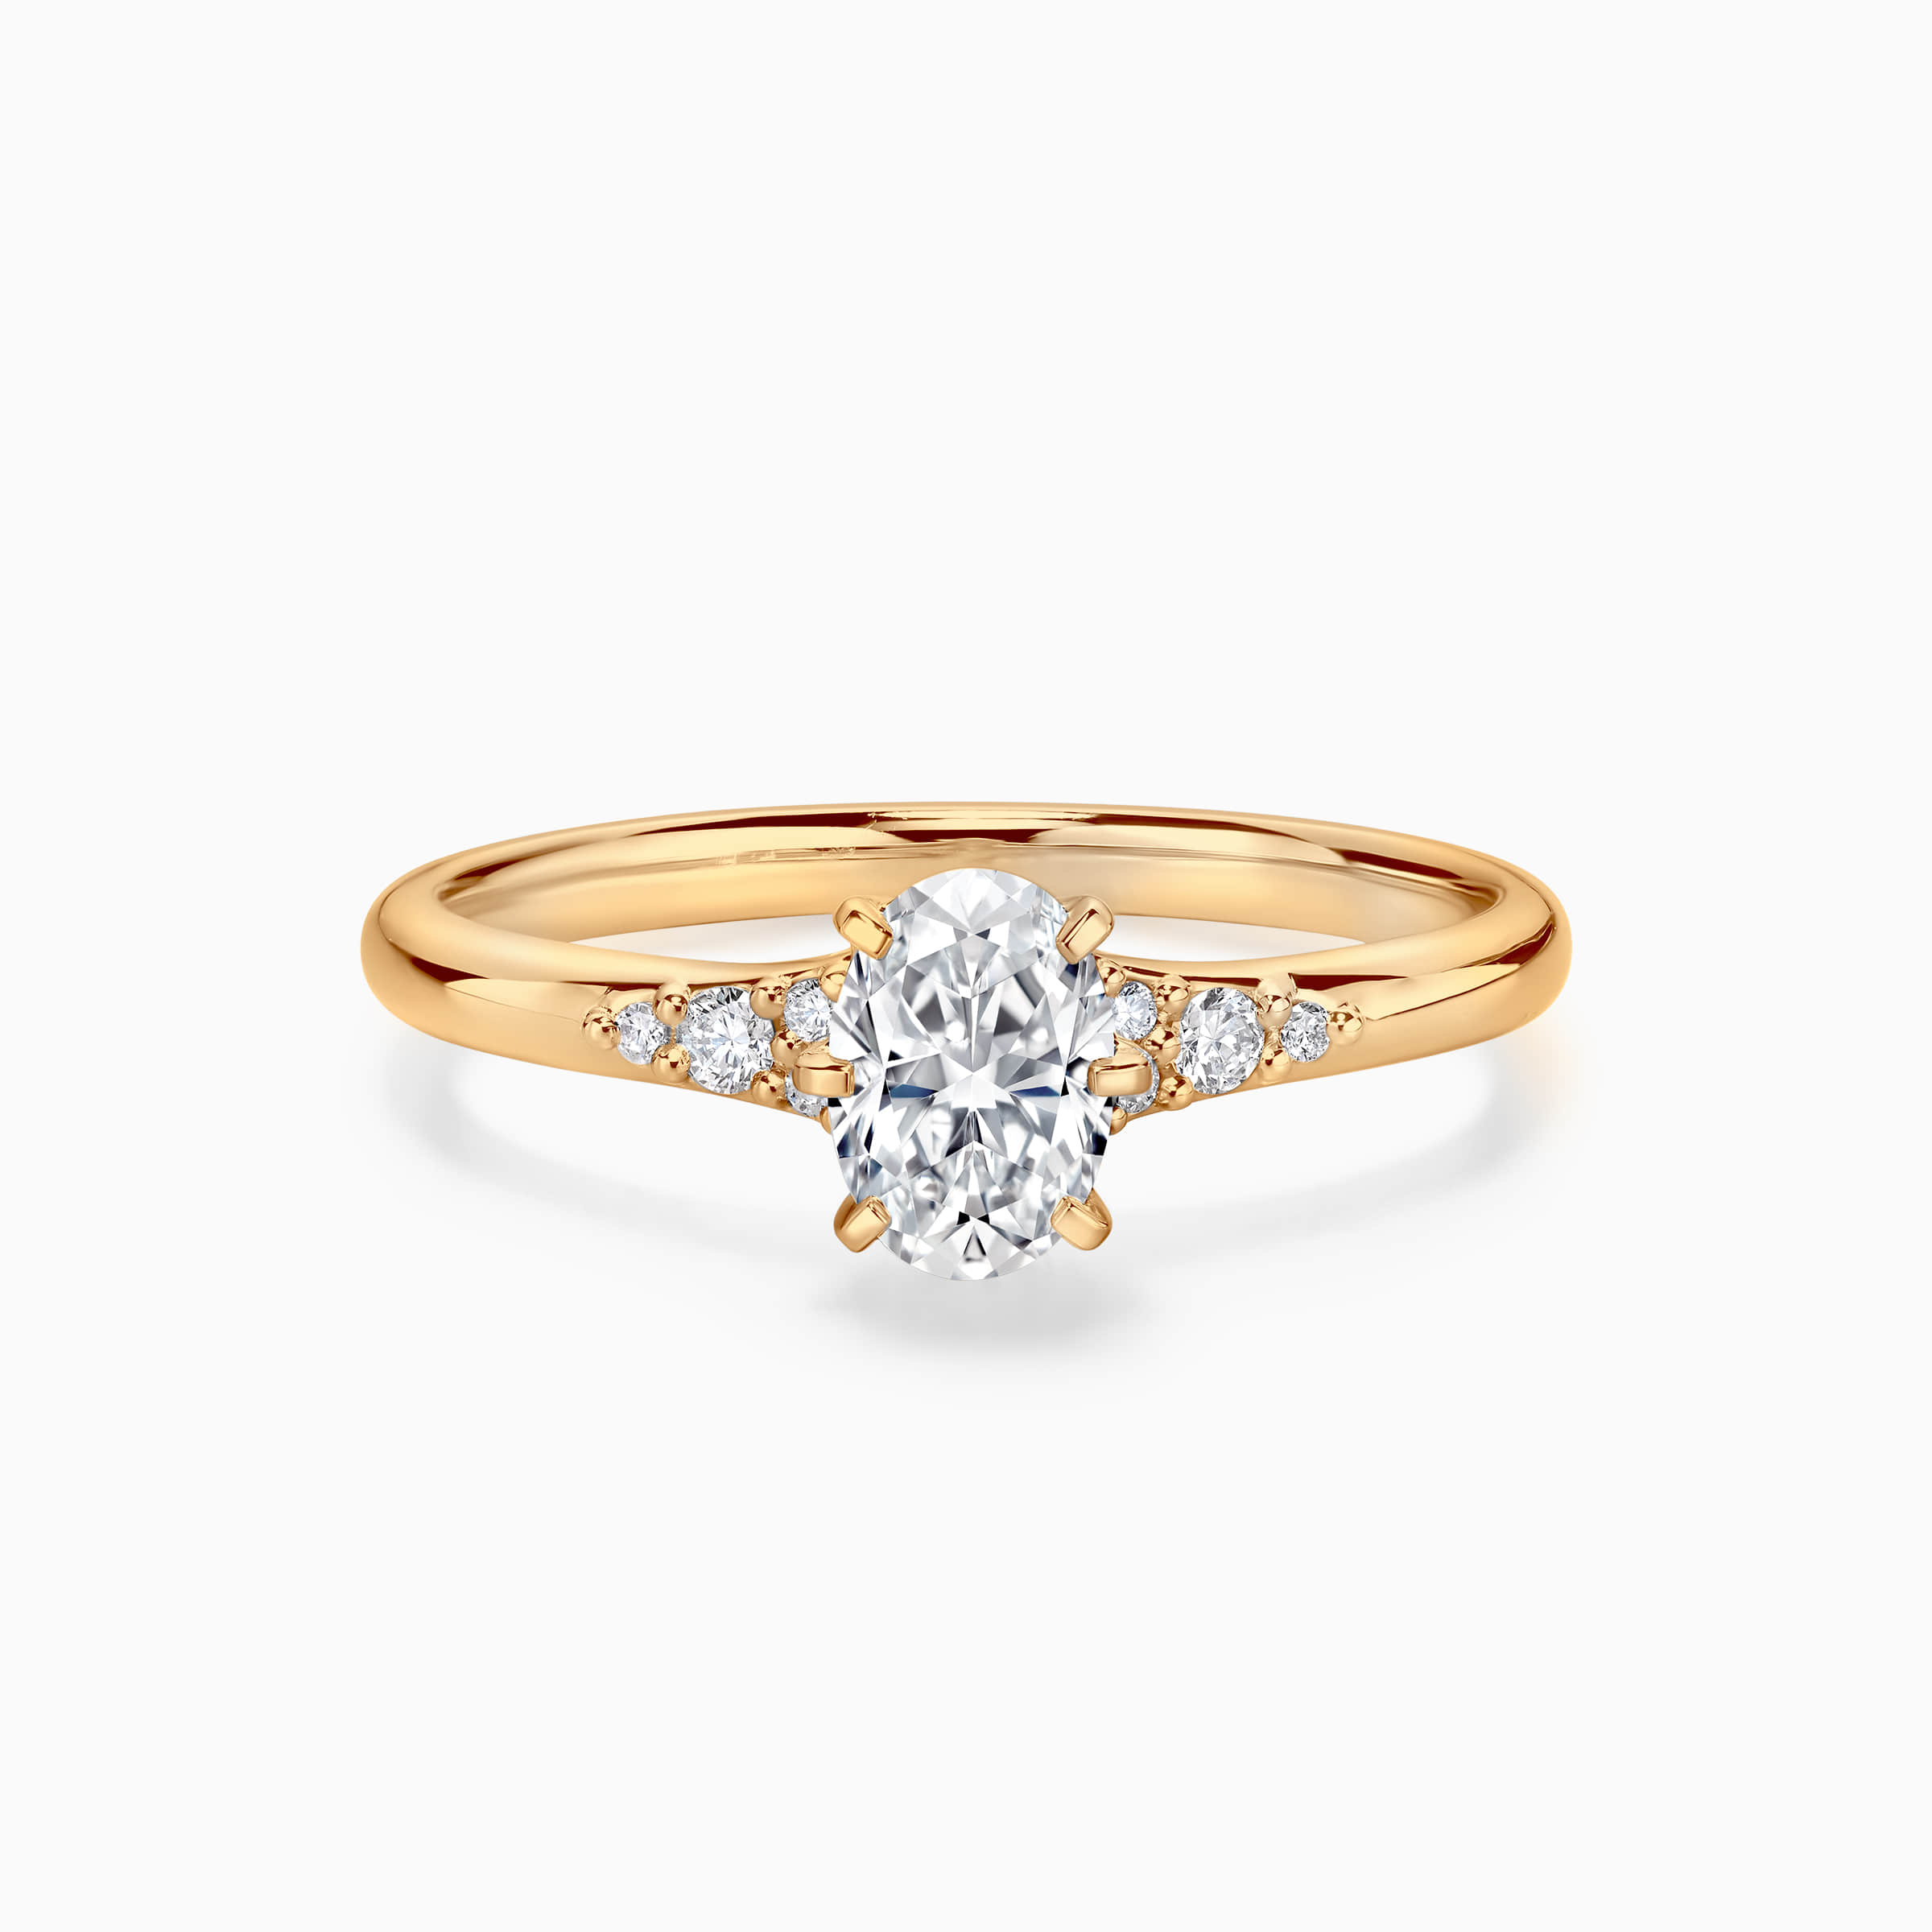 Darry Ring oval cut promise ring wirh side stones in yellow gold